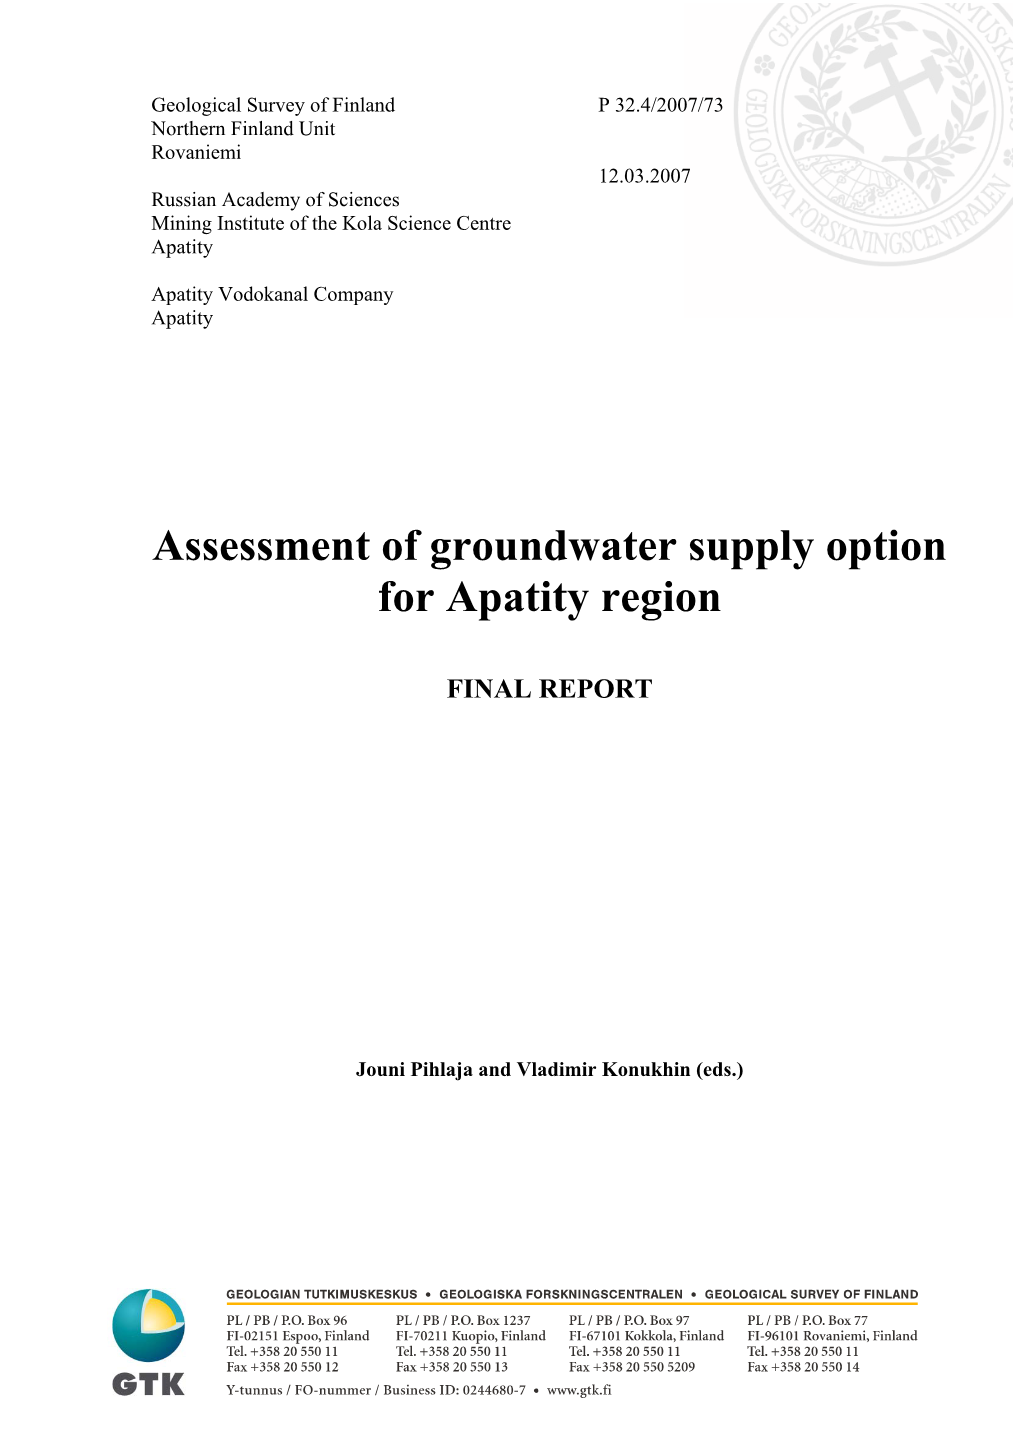 Assessment of Groundwater Supply Option for Apatity Region